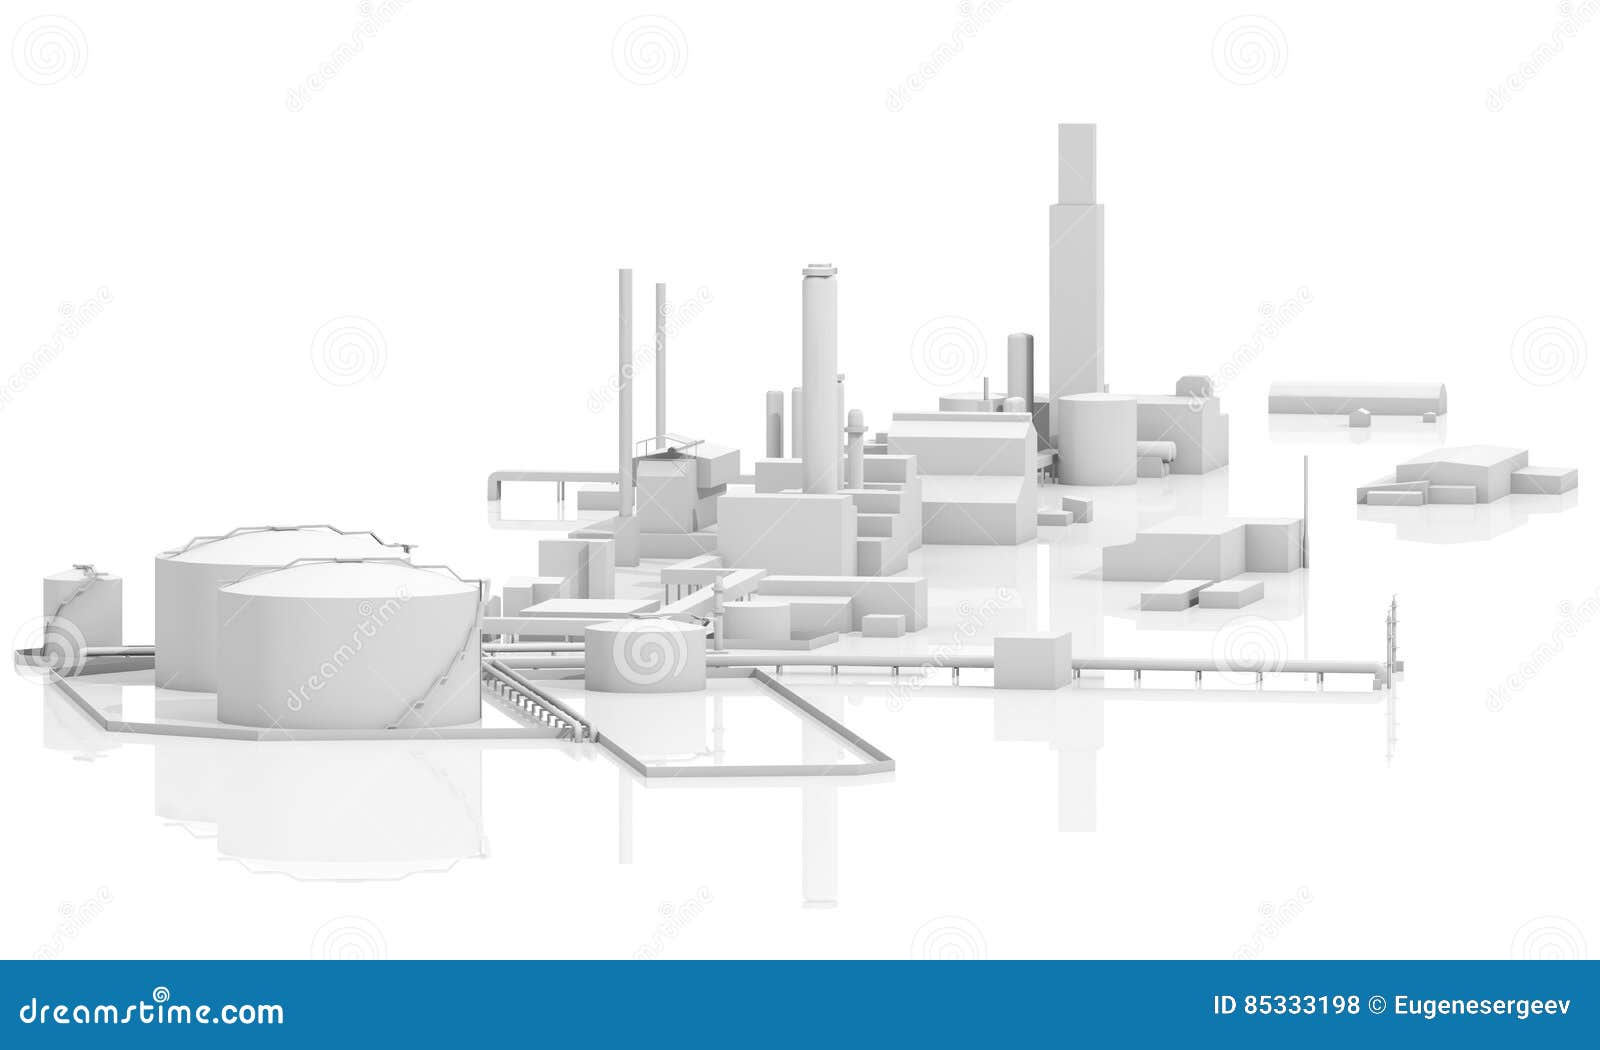 Abstract 3d Modern Industrial Facility Stock Illustration